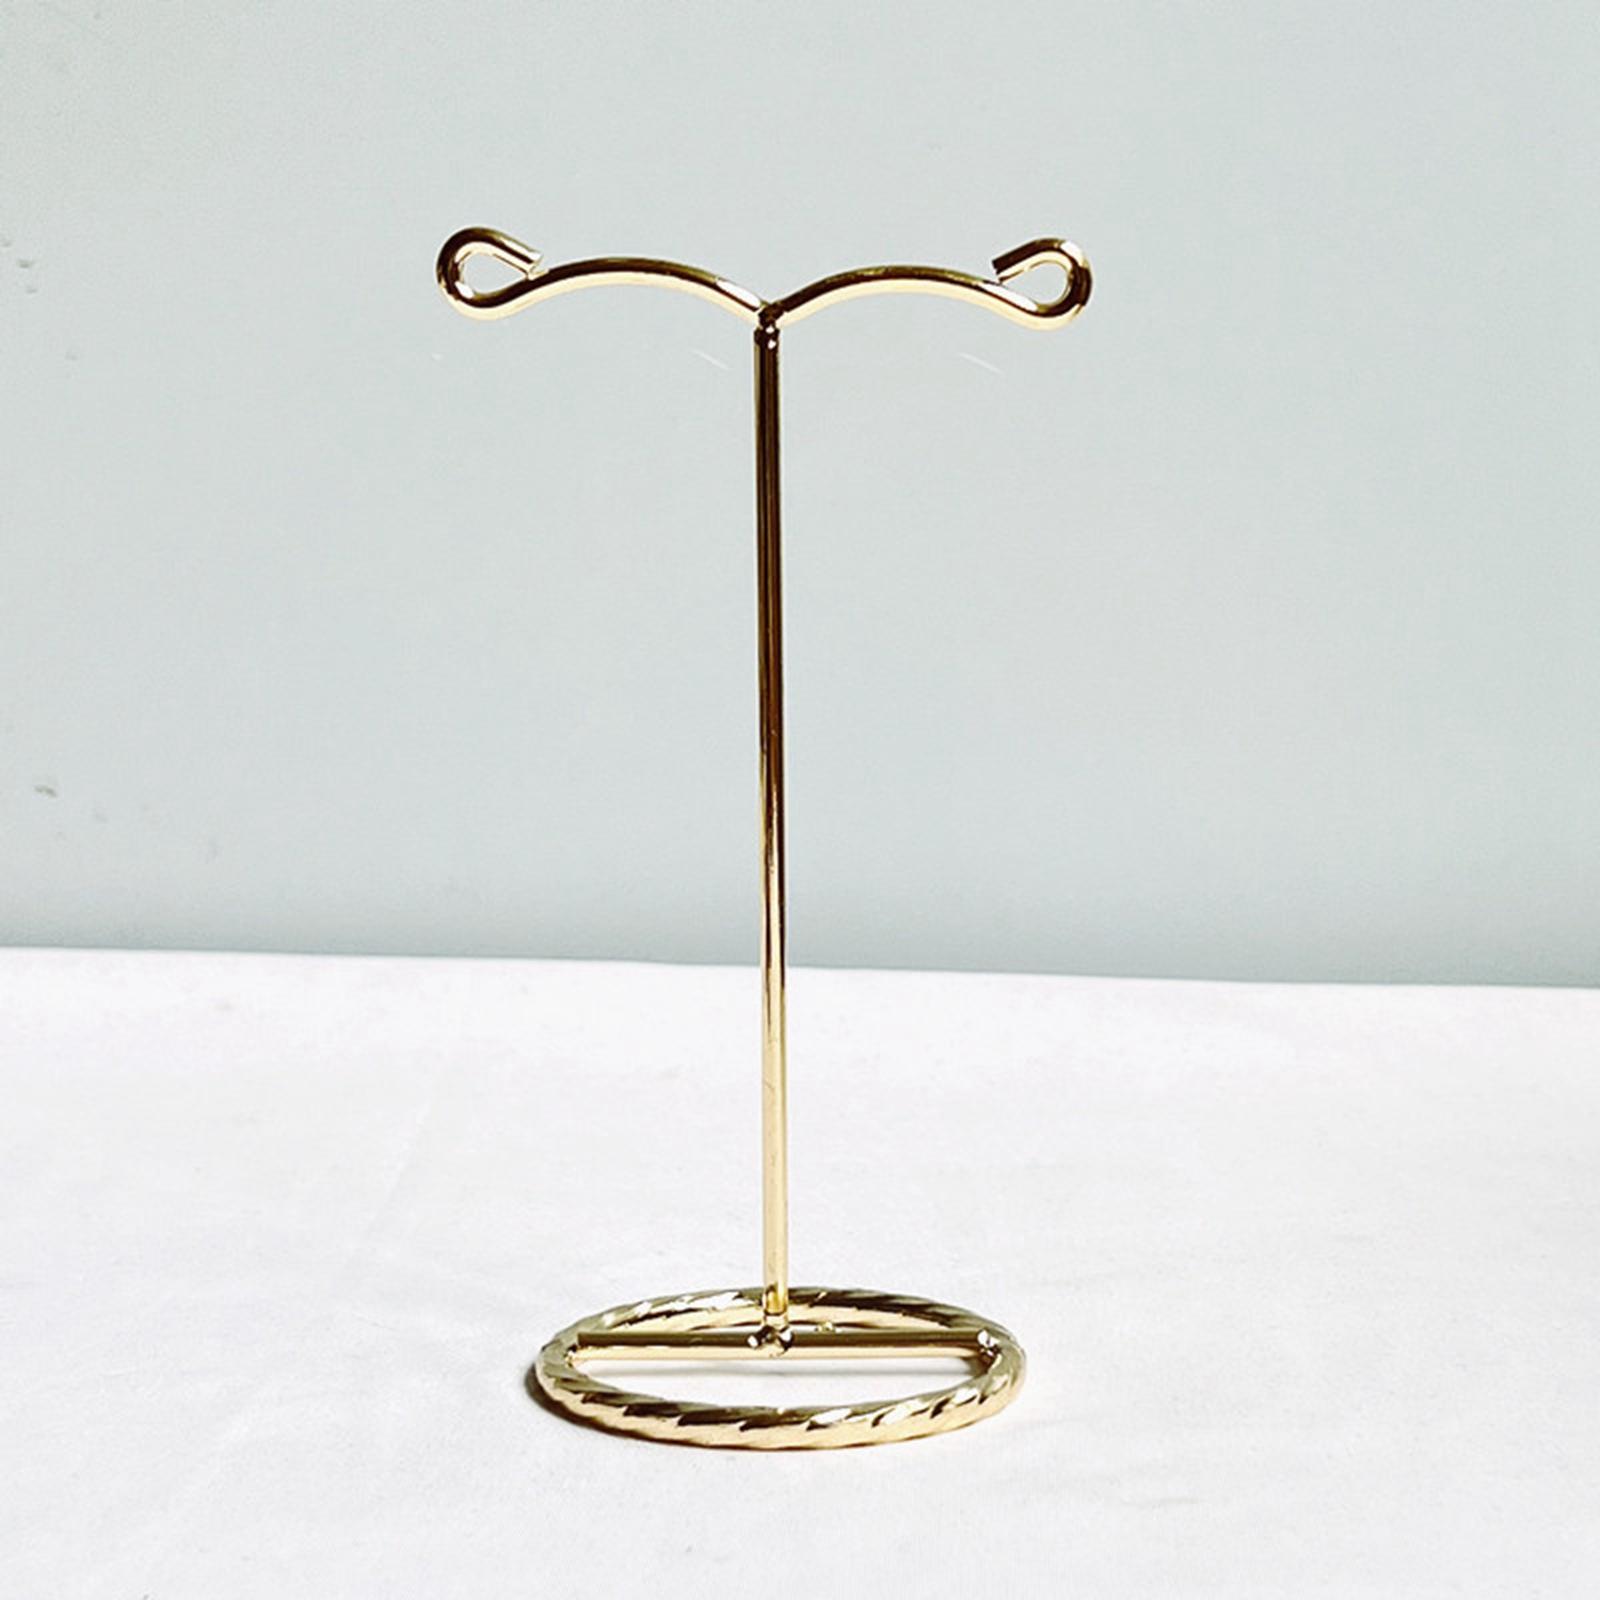 Metal Earring Display Stand Holder Jewelry Necklace Rack Organizer